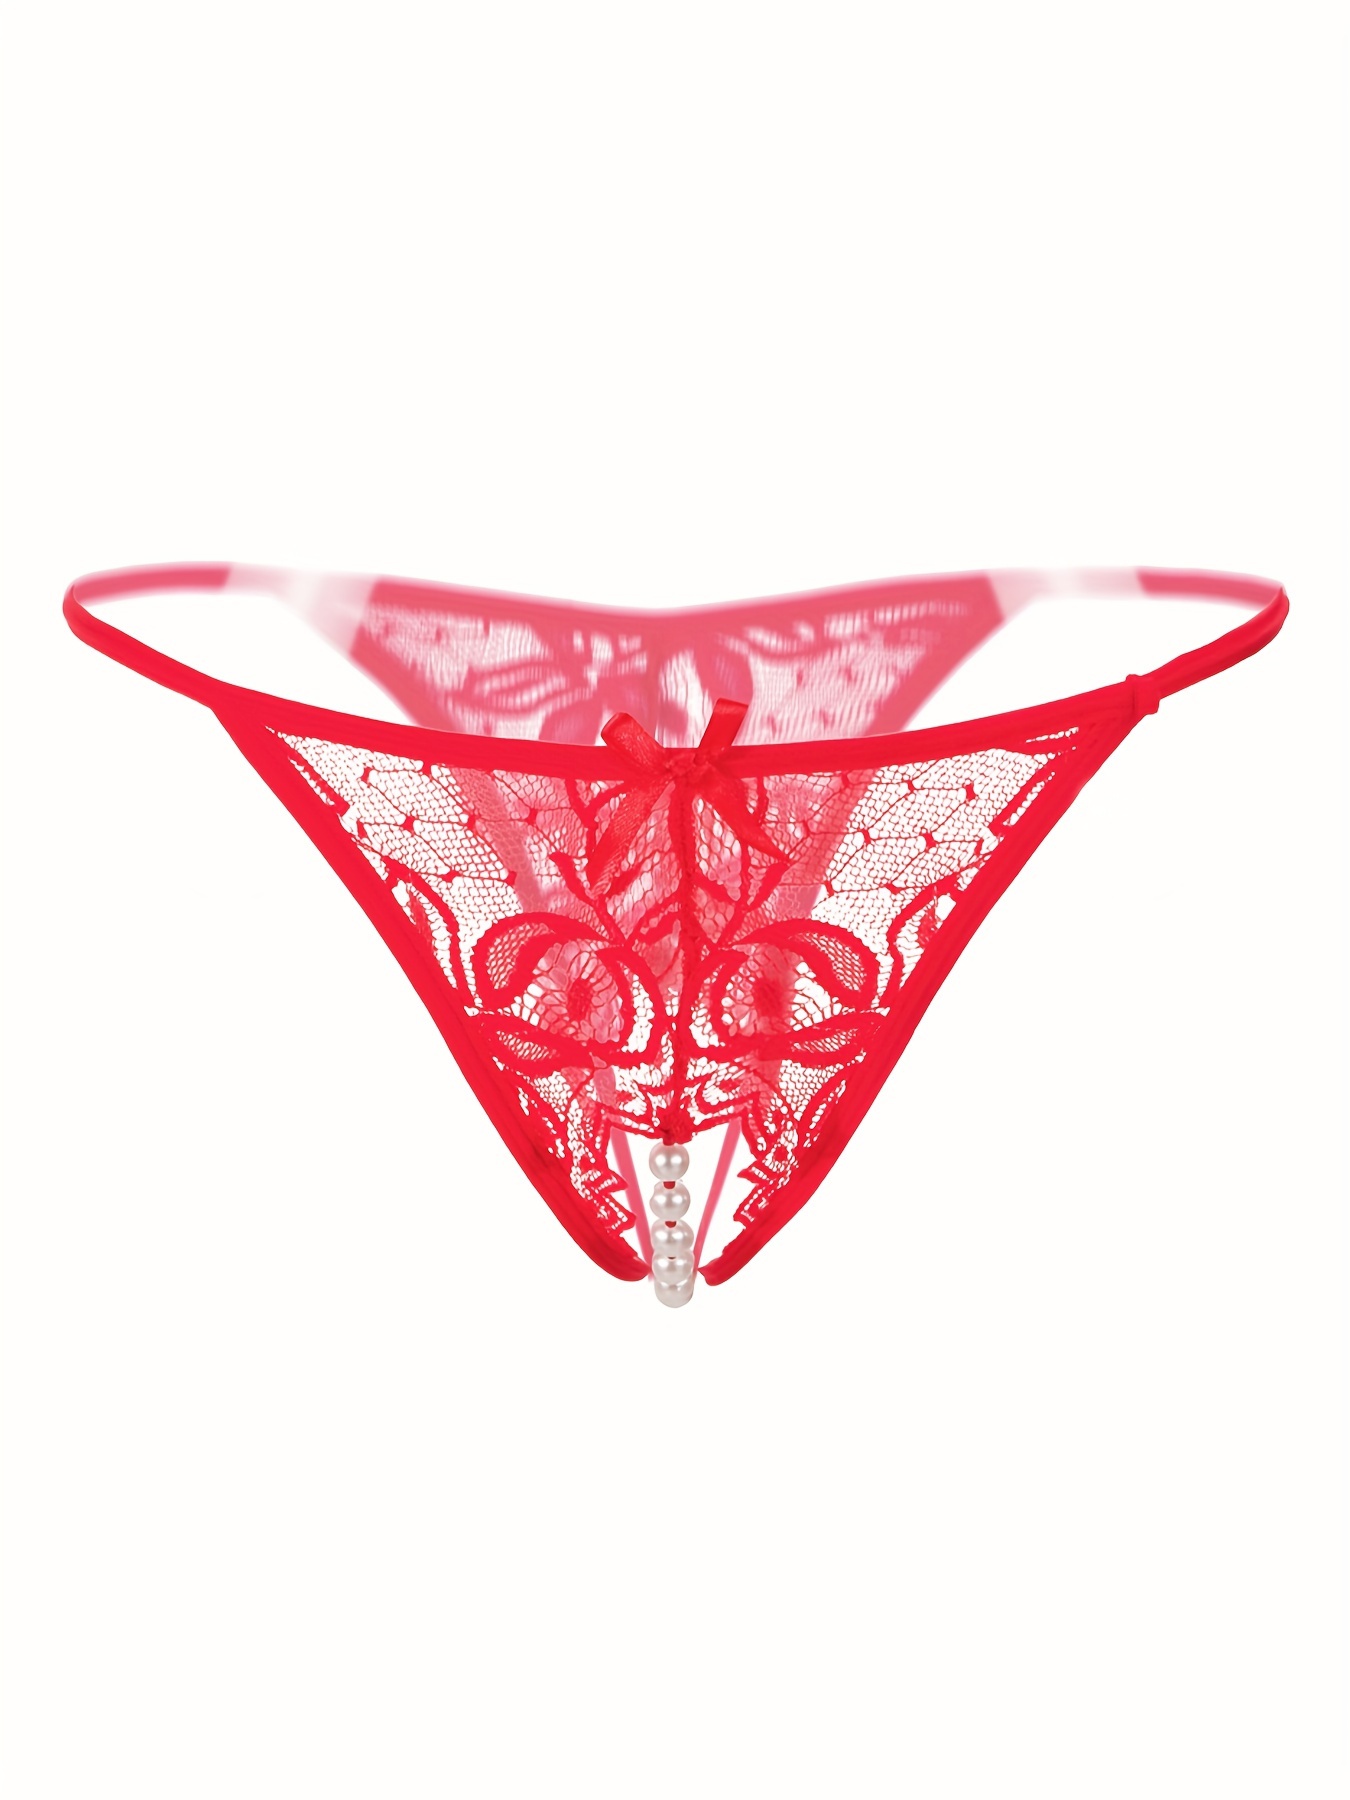 Sexy Lingerie Women's Panties Crotch Opening Transparent G-strings